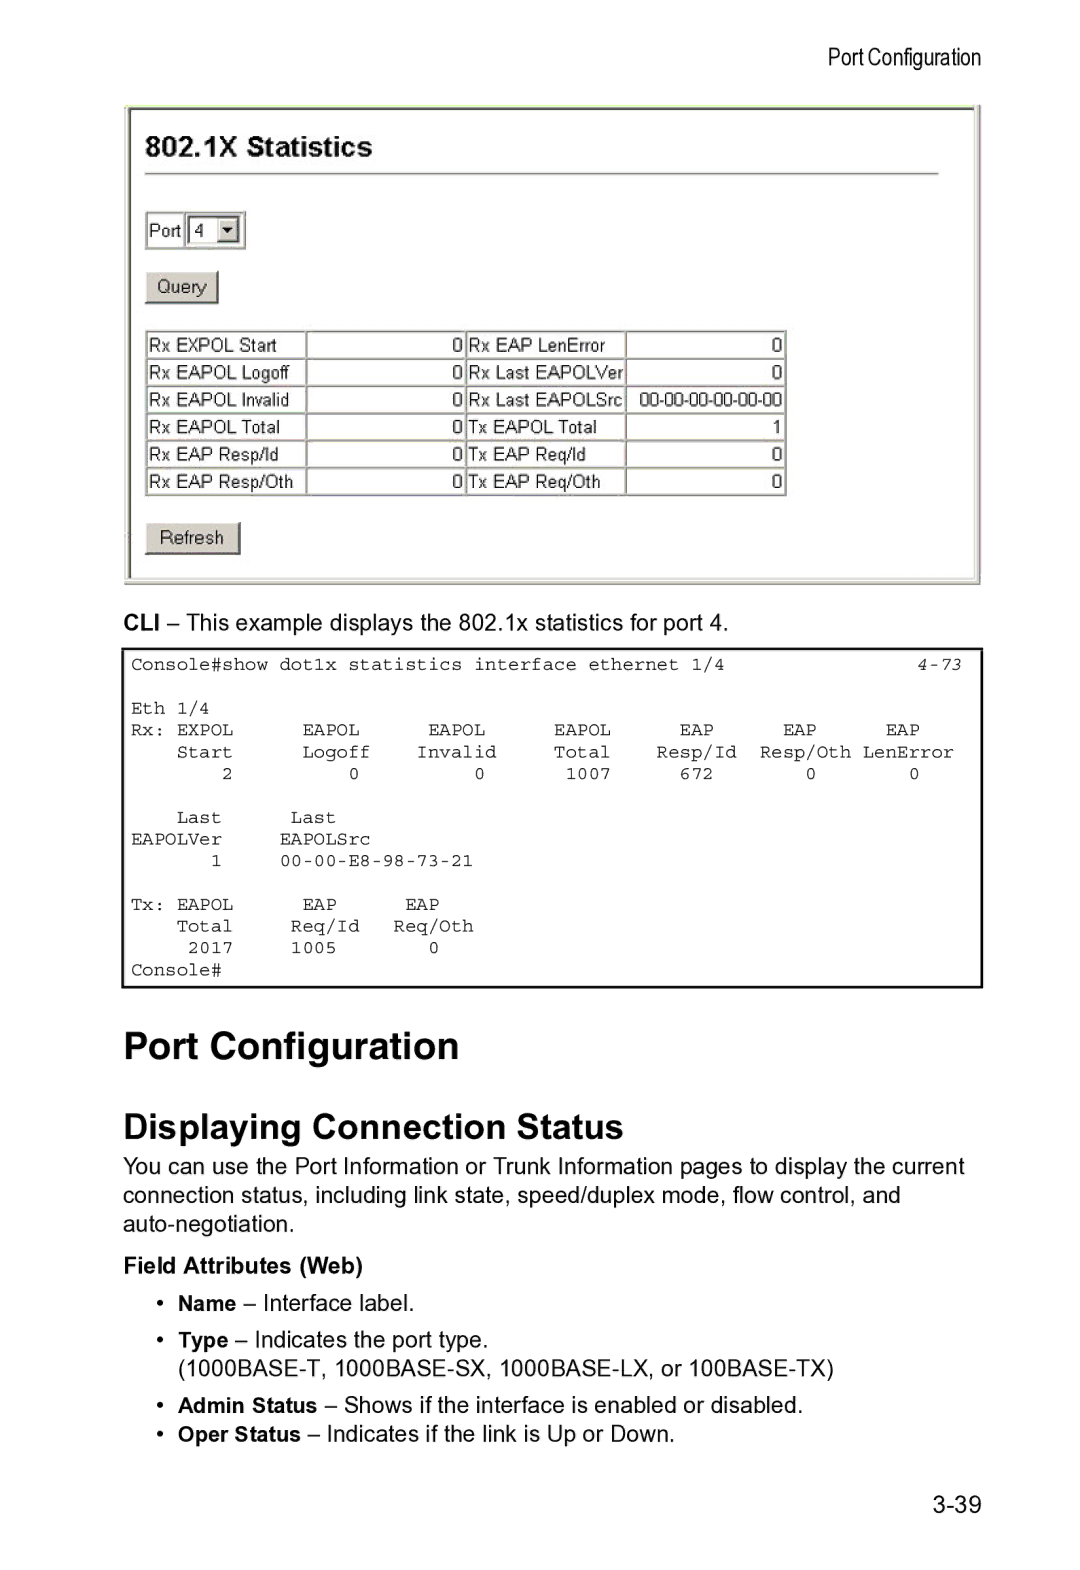 Accton Technology VS4512DC manual Port Configuration, Displaying Connection Status, Field Attributes Web 